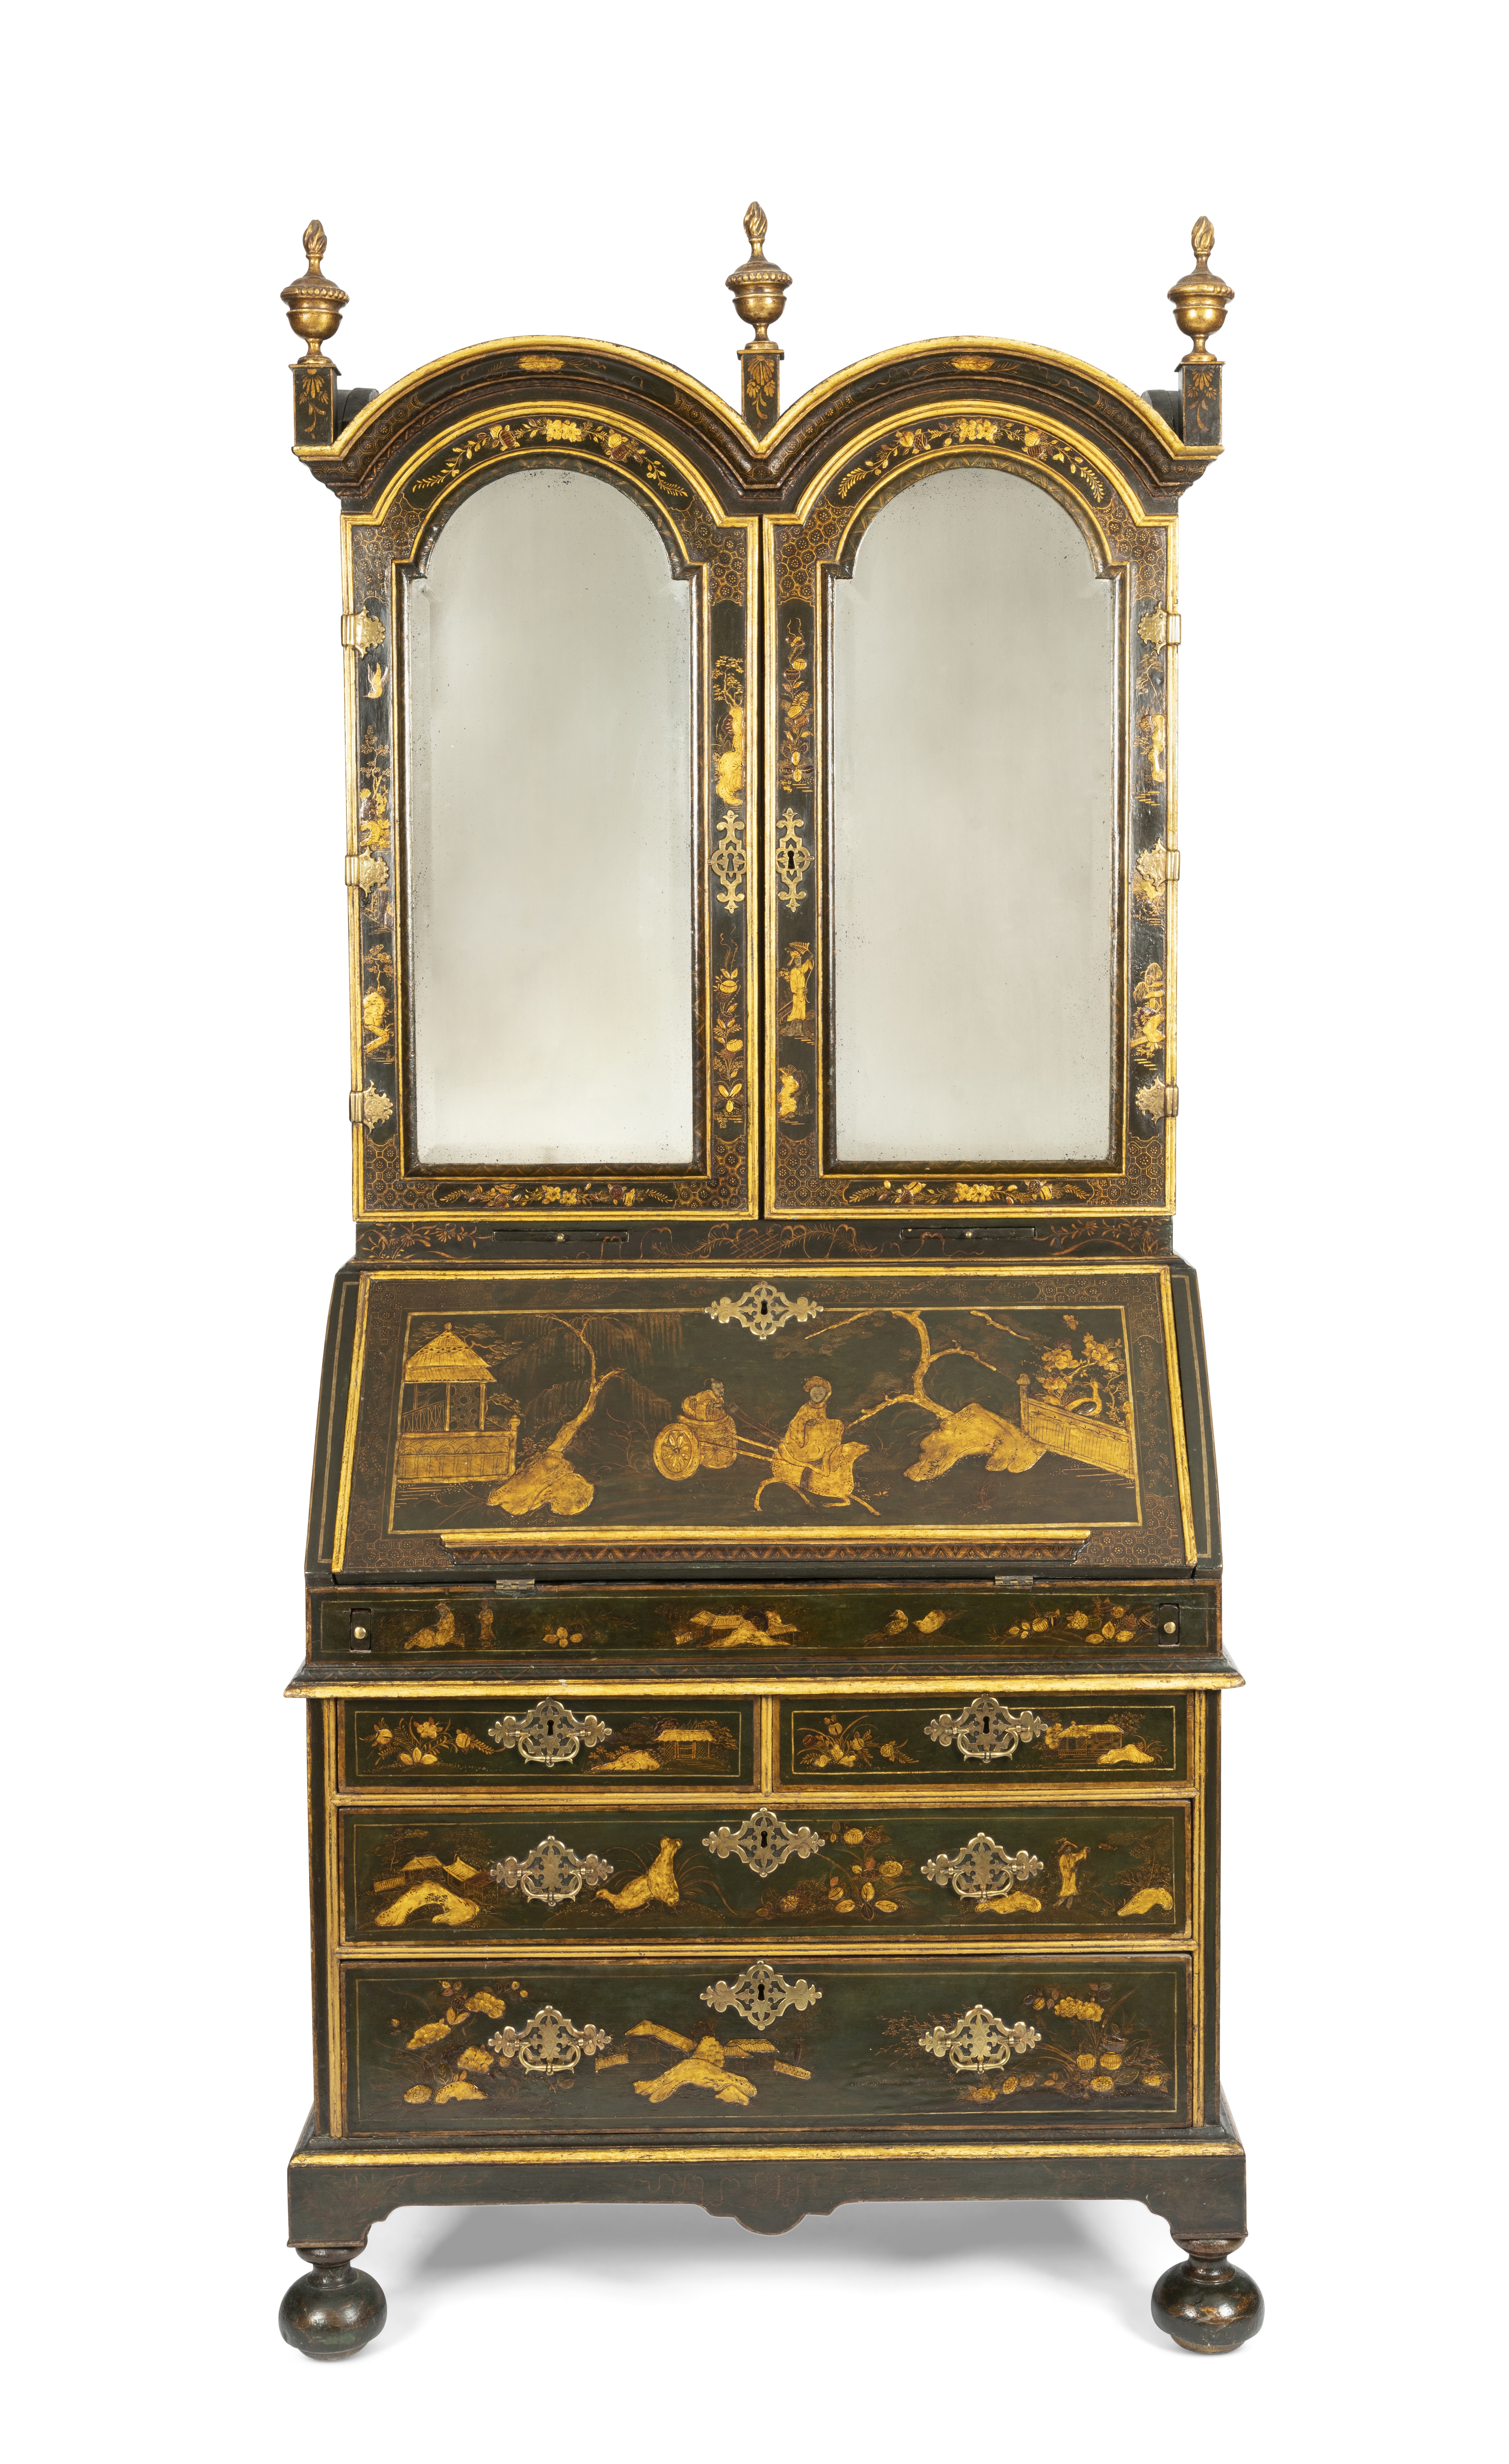 A fine and rare George I dark green and gilt japanned bureau-cabinetIn the manner of John Belchie...